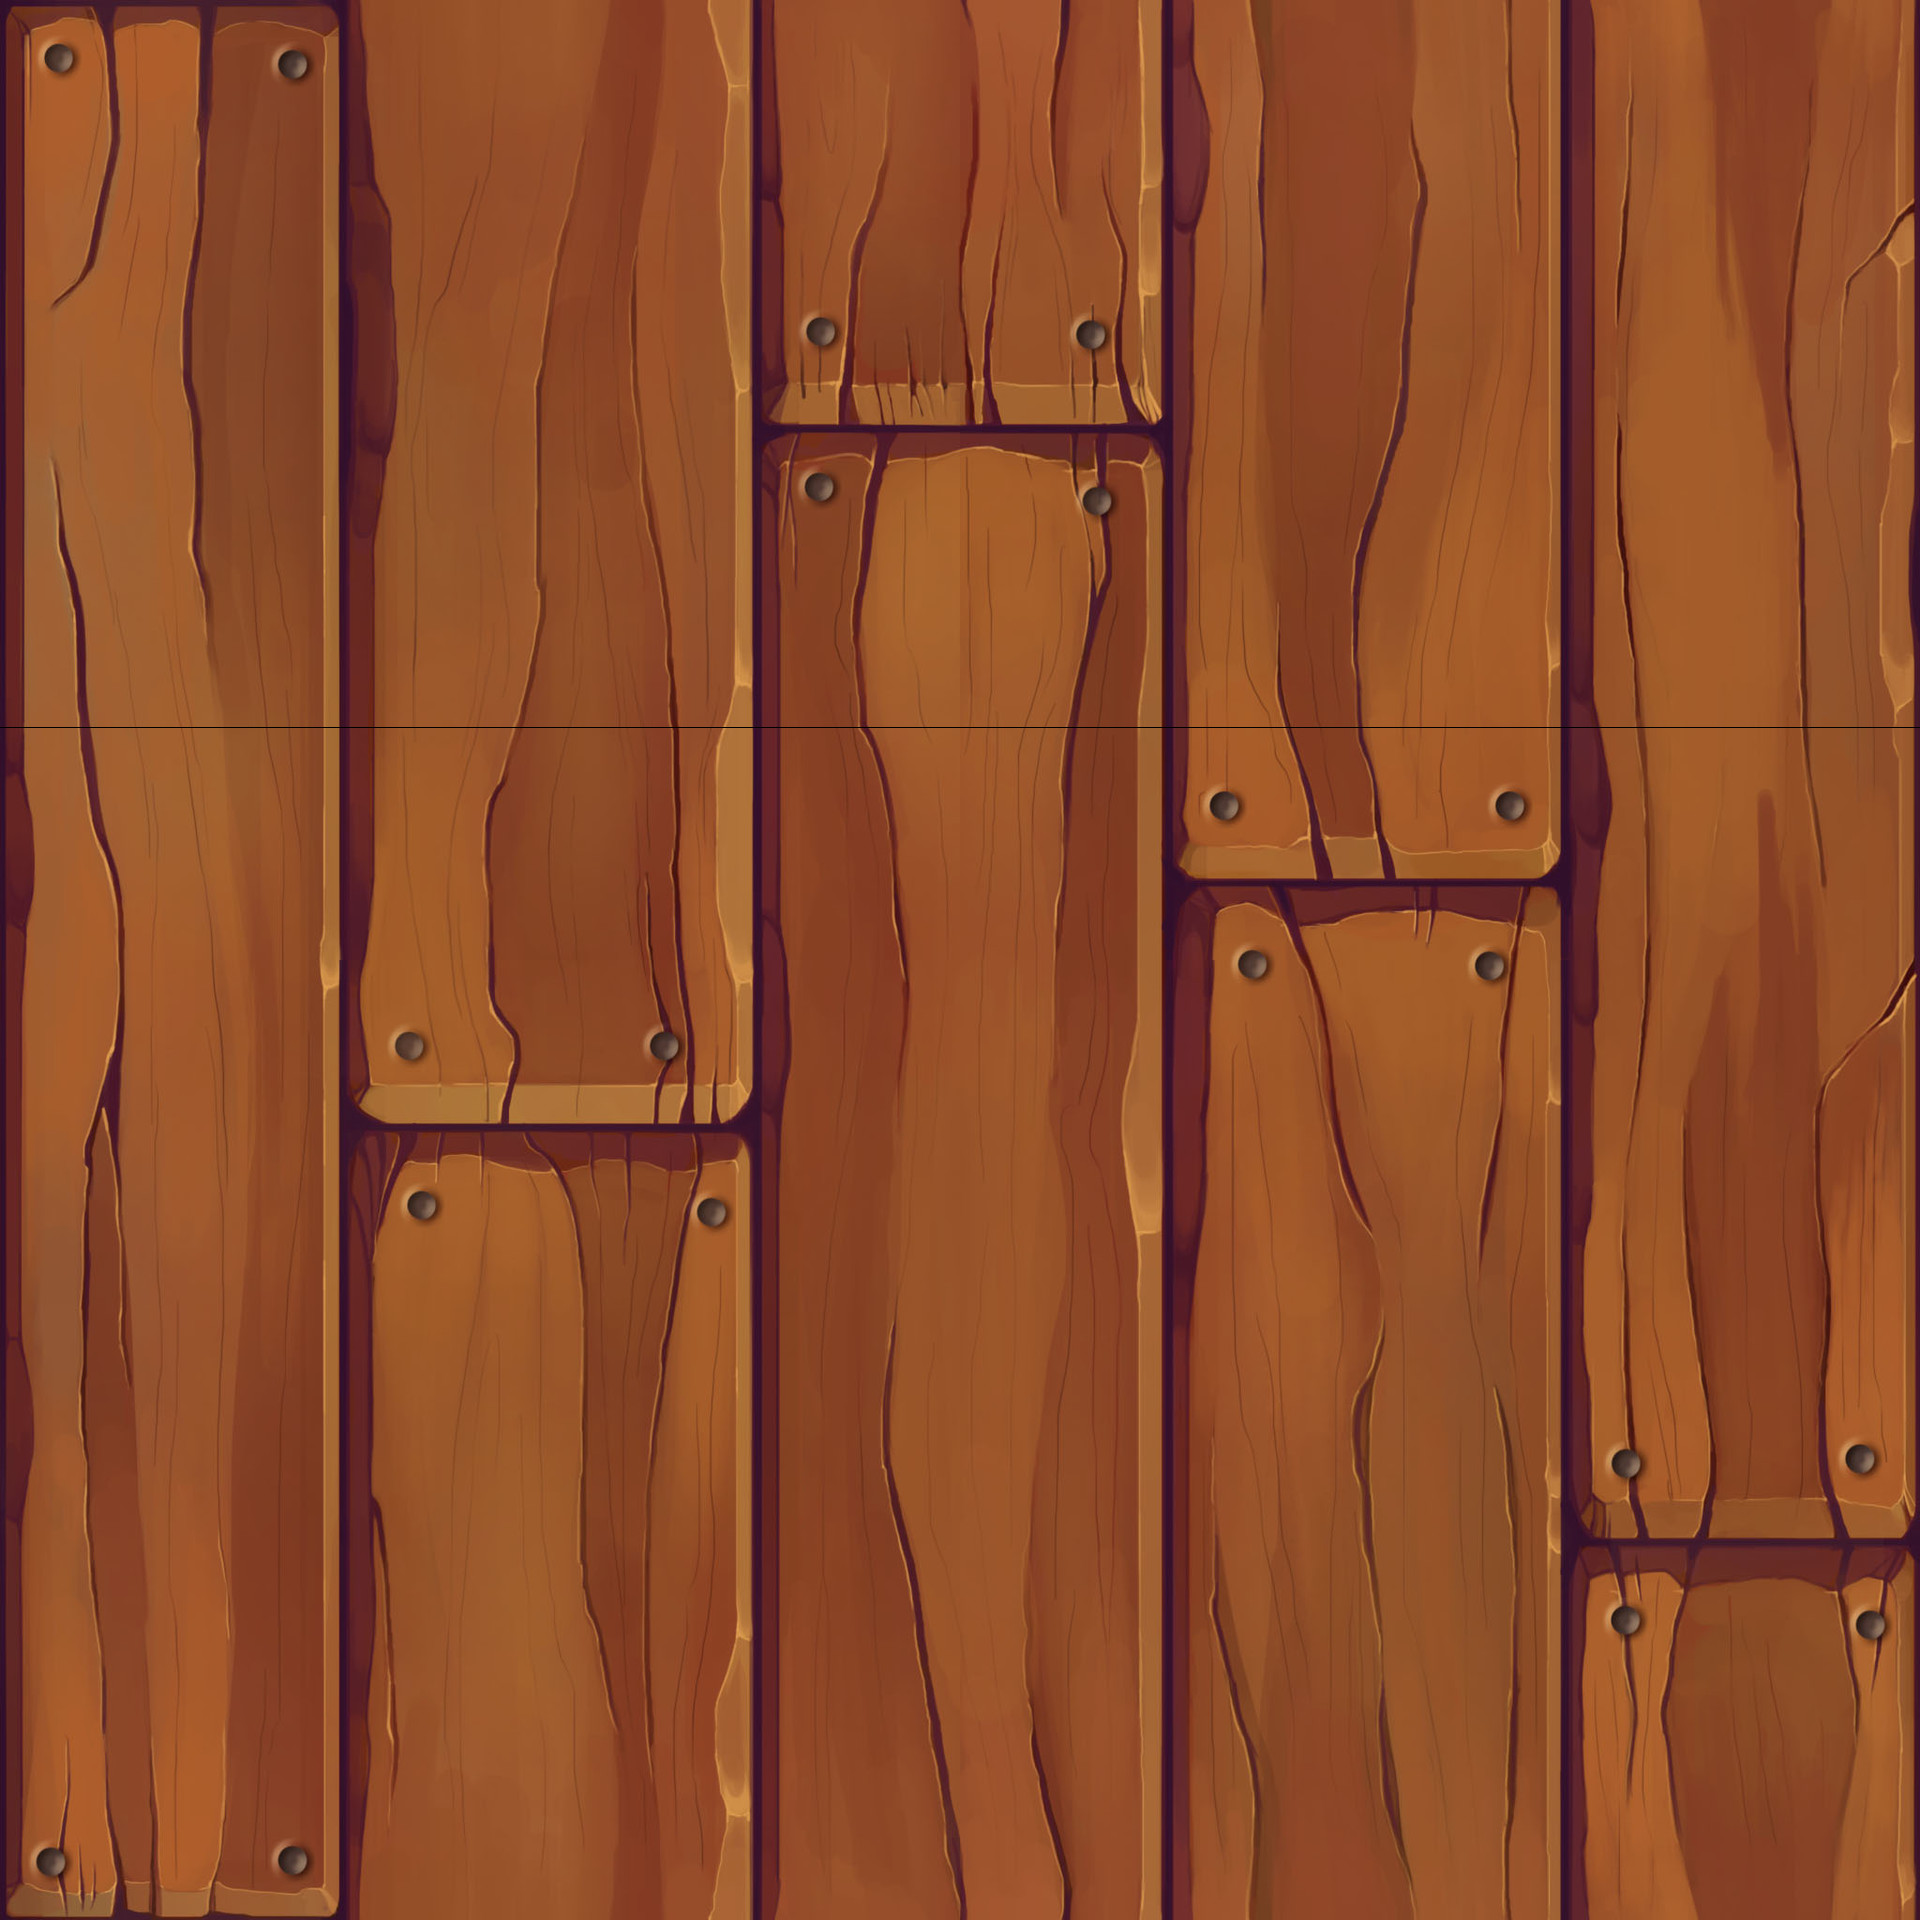 Painted Wood Texture